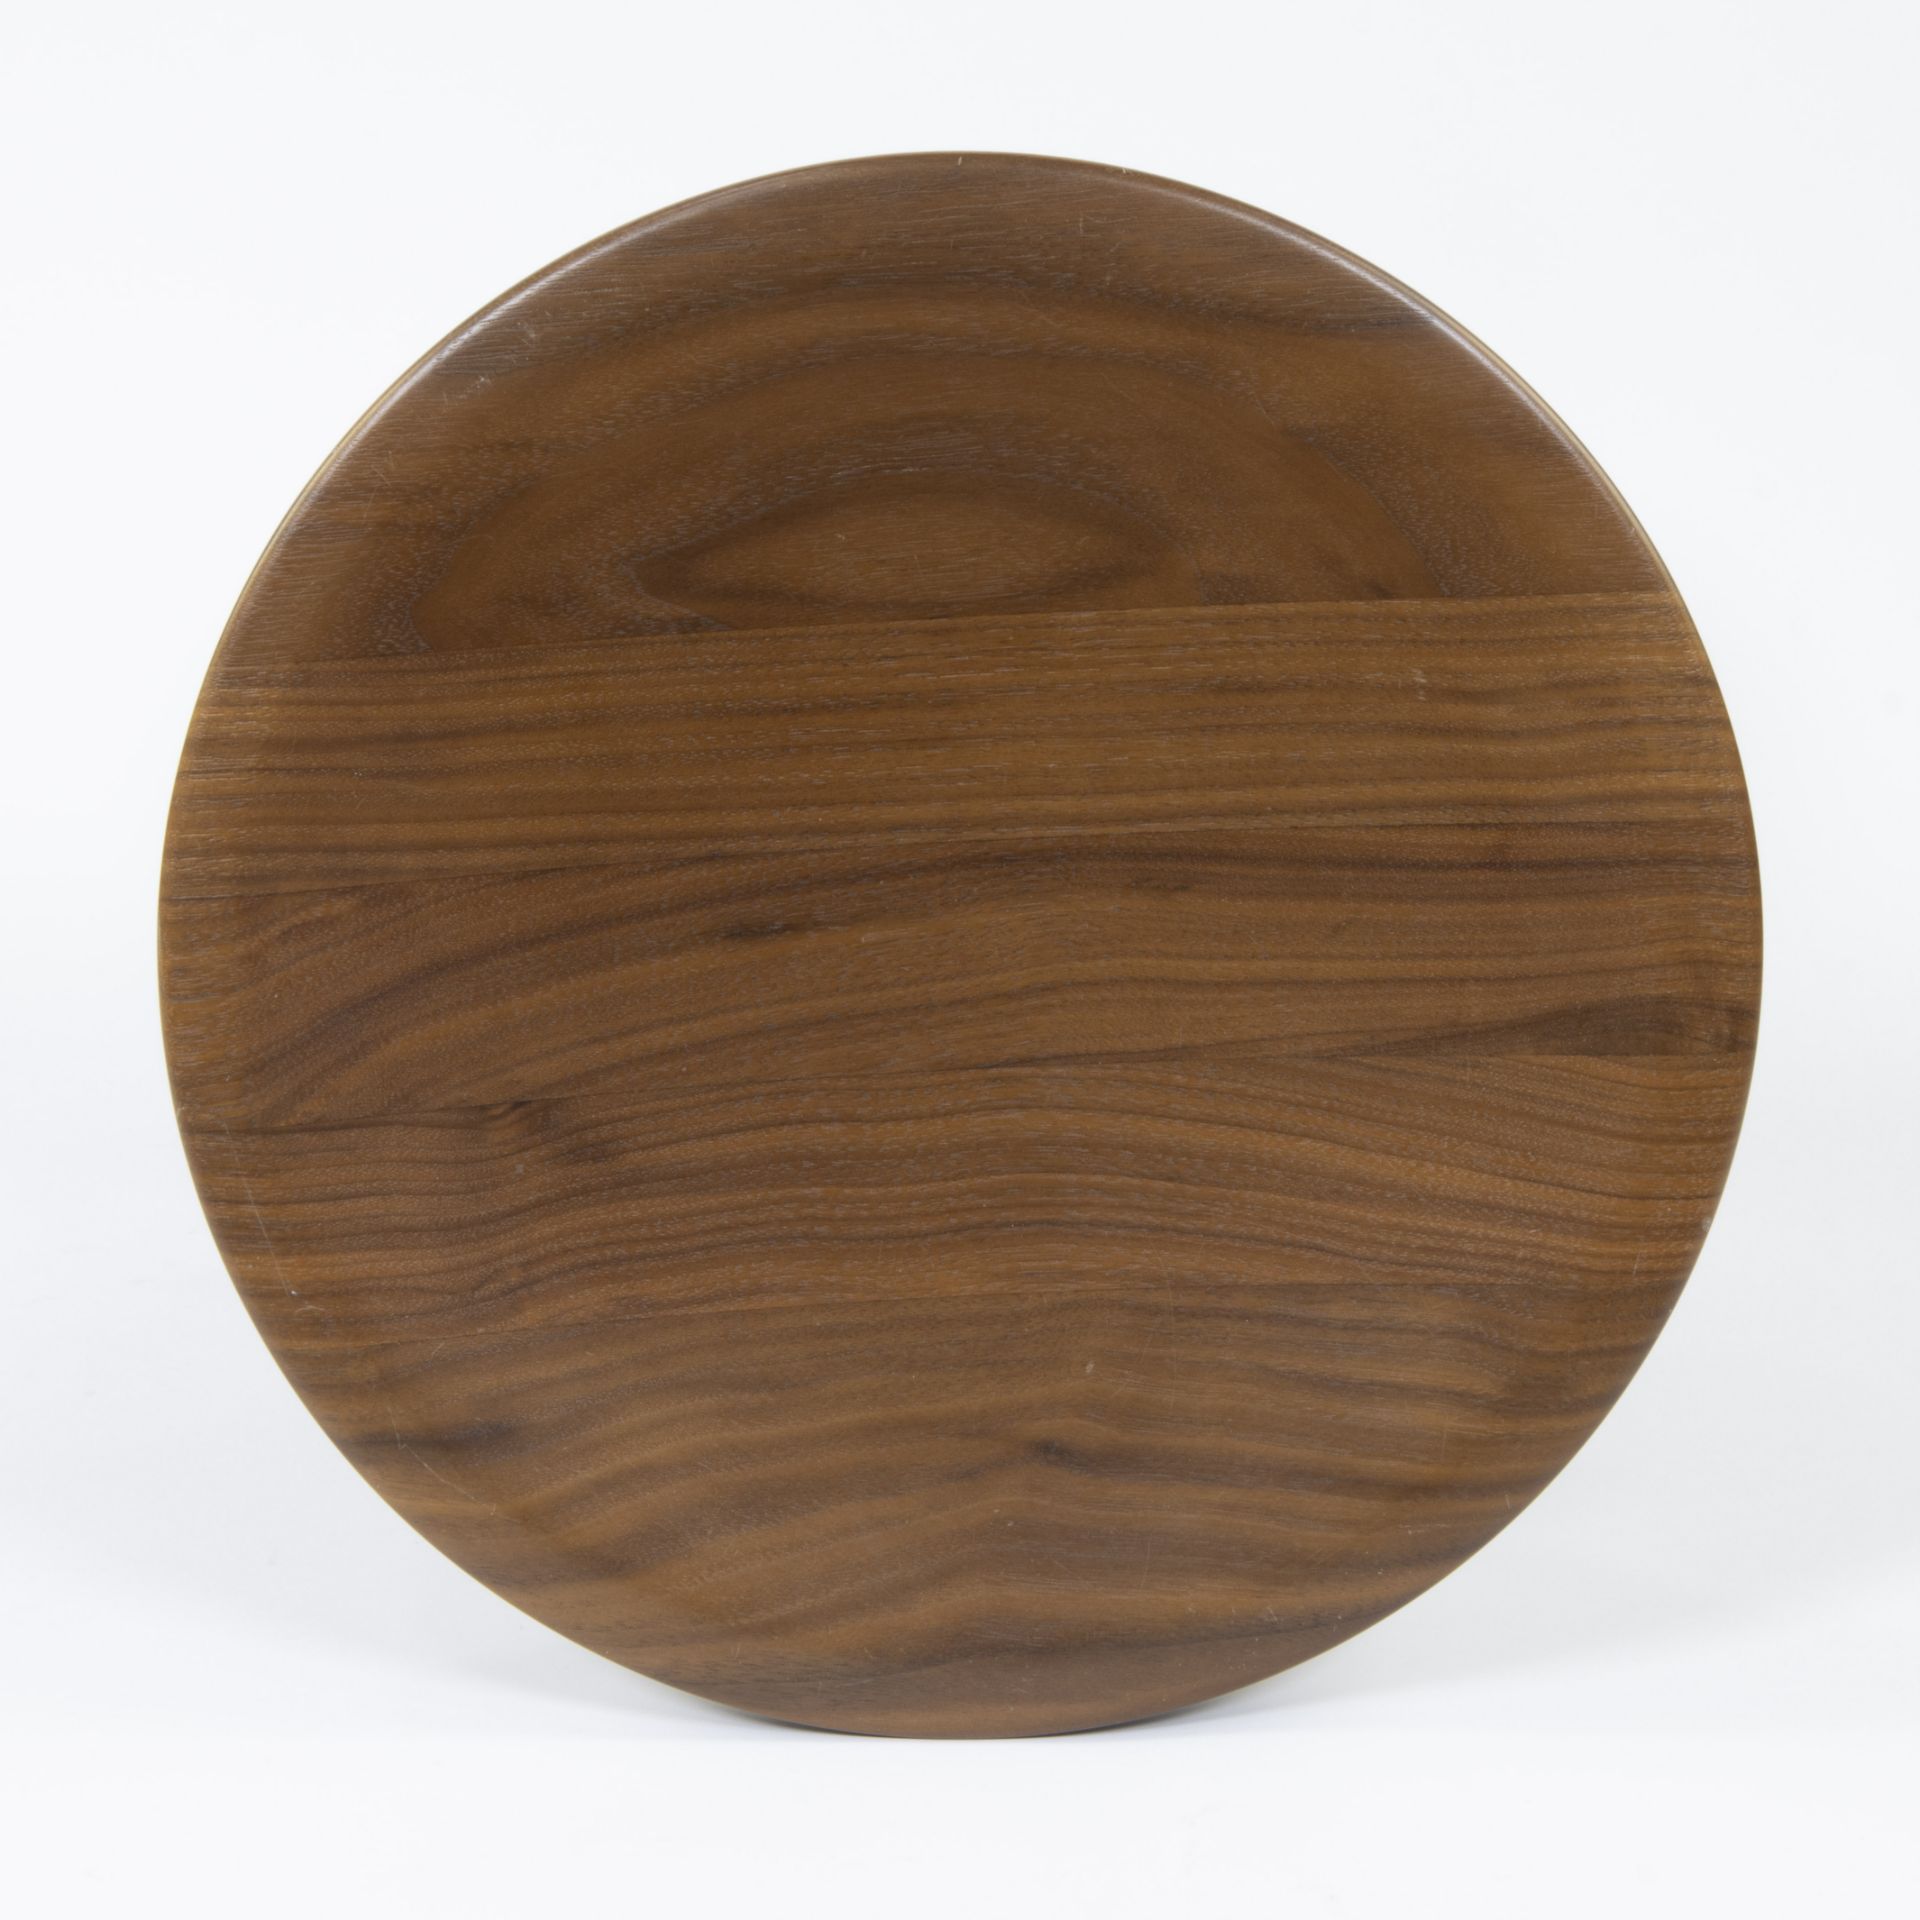 Eames stool in solid walnut, model B 1960, published by Vitra, design by Charles and Ray Eames - Bild 5 aus 6